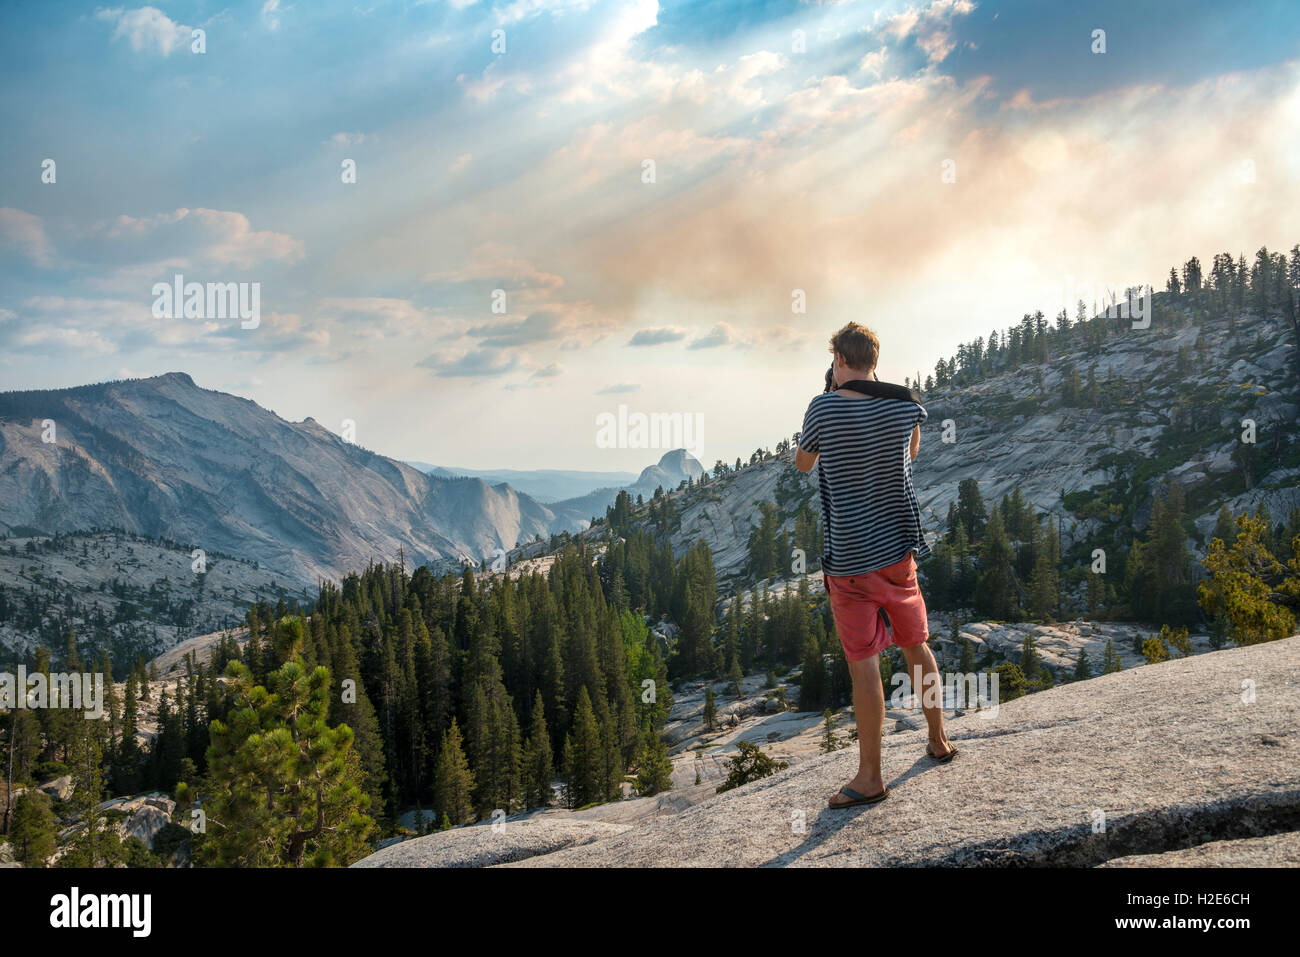 Jeune homme, tourist photographing Haute Sierra, Olmsted Point, Yosemite National Park, California, USA Banque D'Images